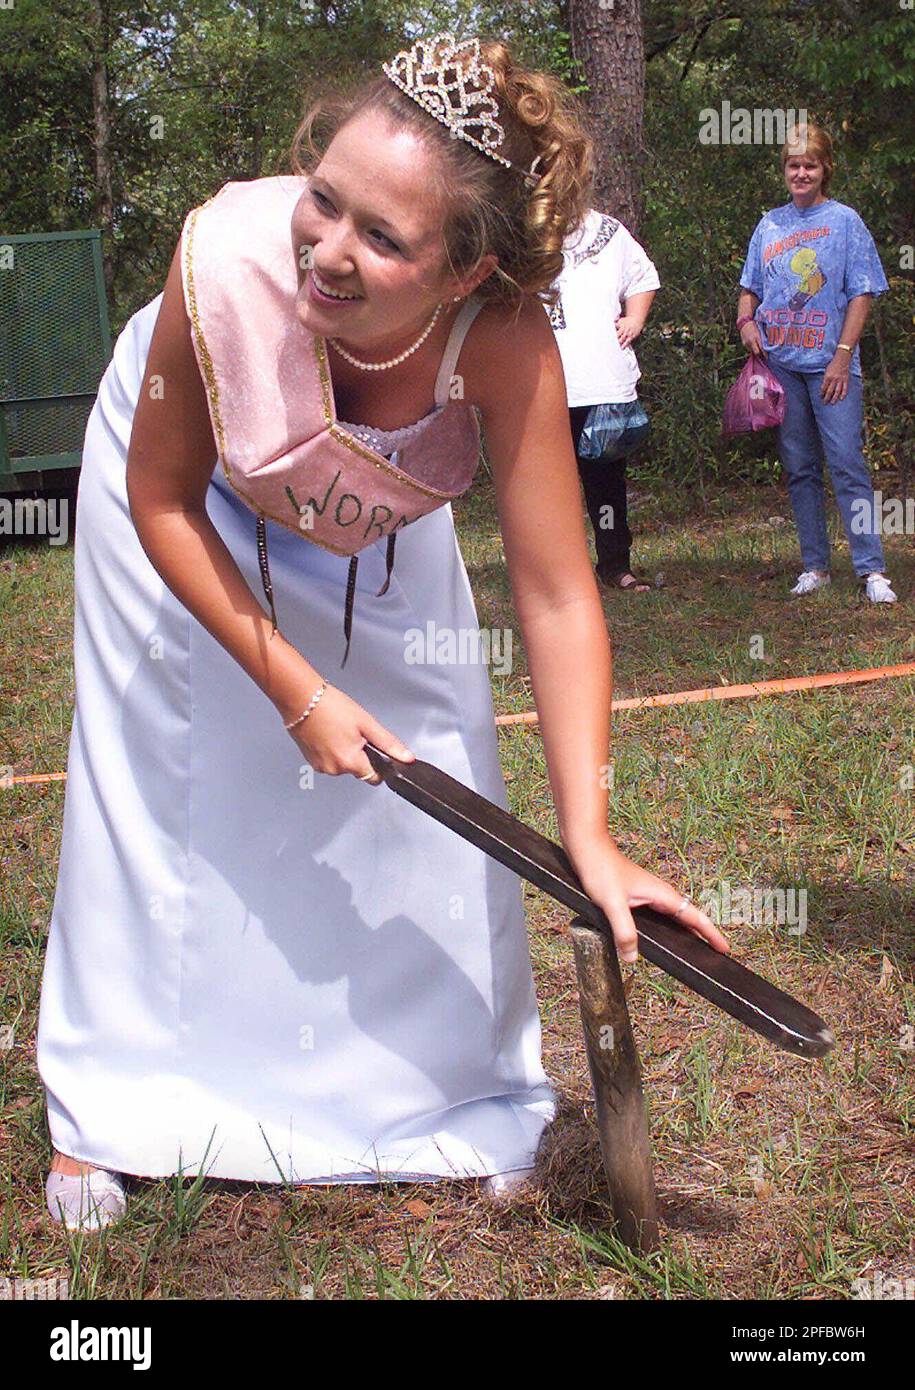 Worm grunting queen Amy Stokley, 17, from Sopchoppy, Fla., tries